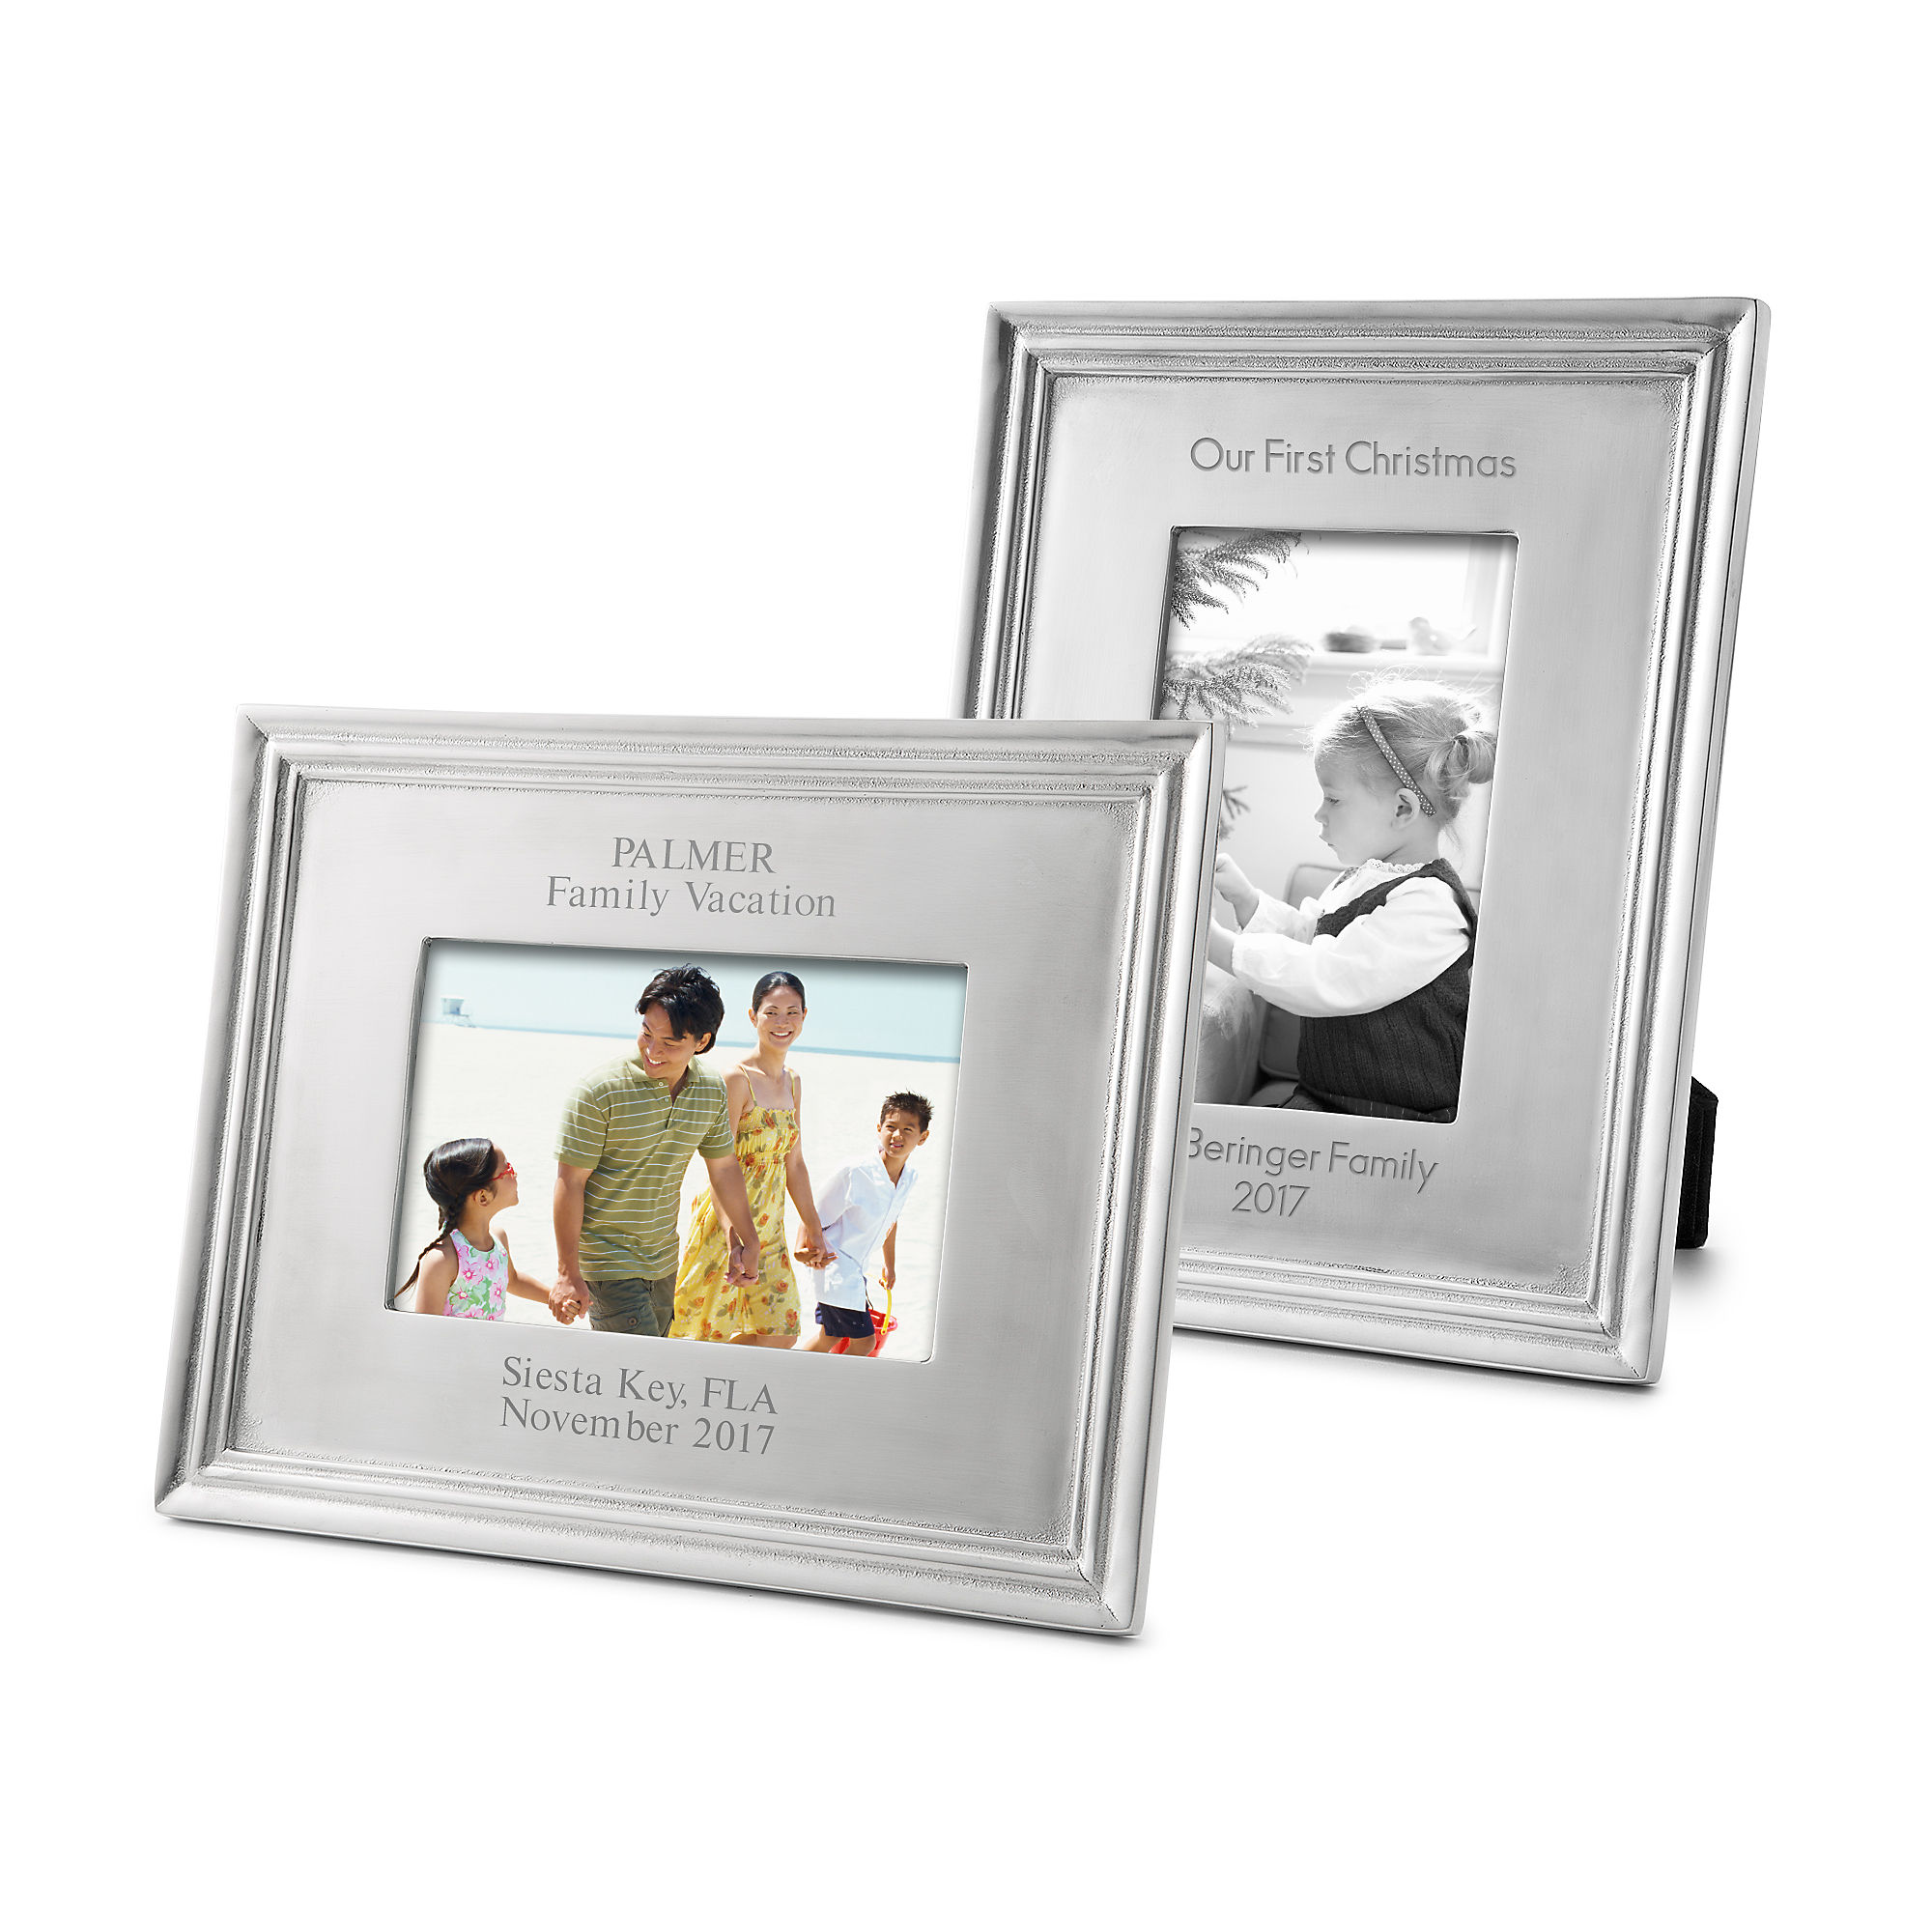 Silver MARIPOSA Basketweave 4x6 inch Picture Frame 